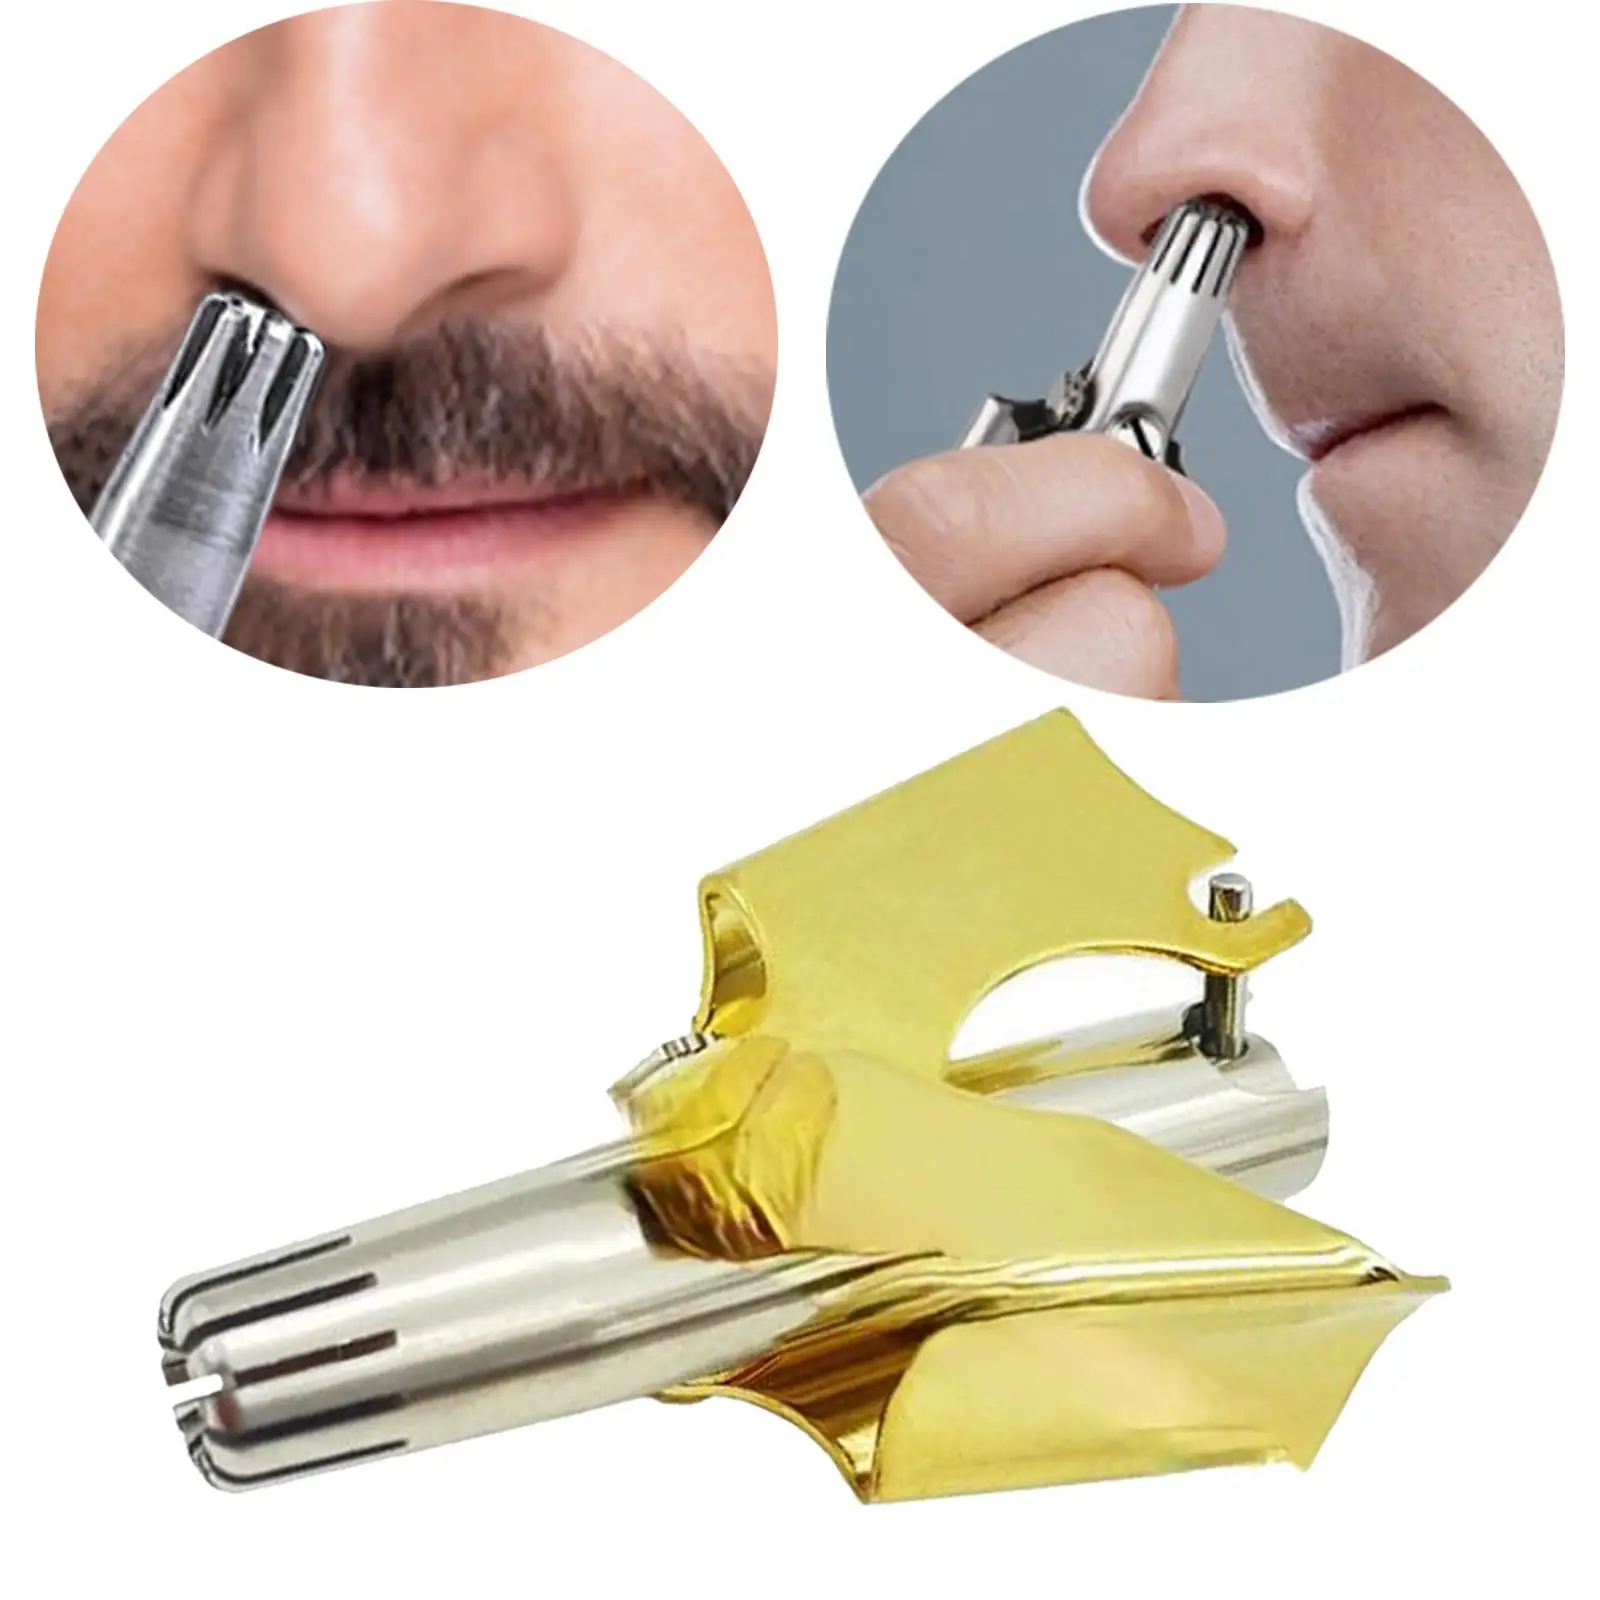 Mini Nose & Ear Hair Trimmer Stainless Steel Nose Razor Shaver Low Manual Noise for Men Women Ear Hair Cutter Gift Silver Gold